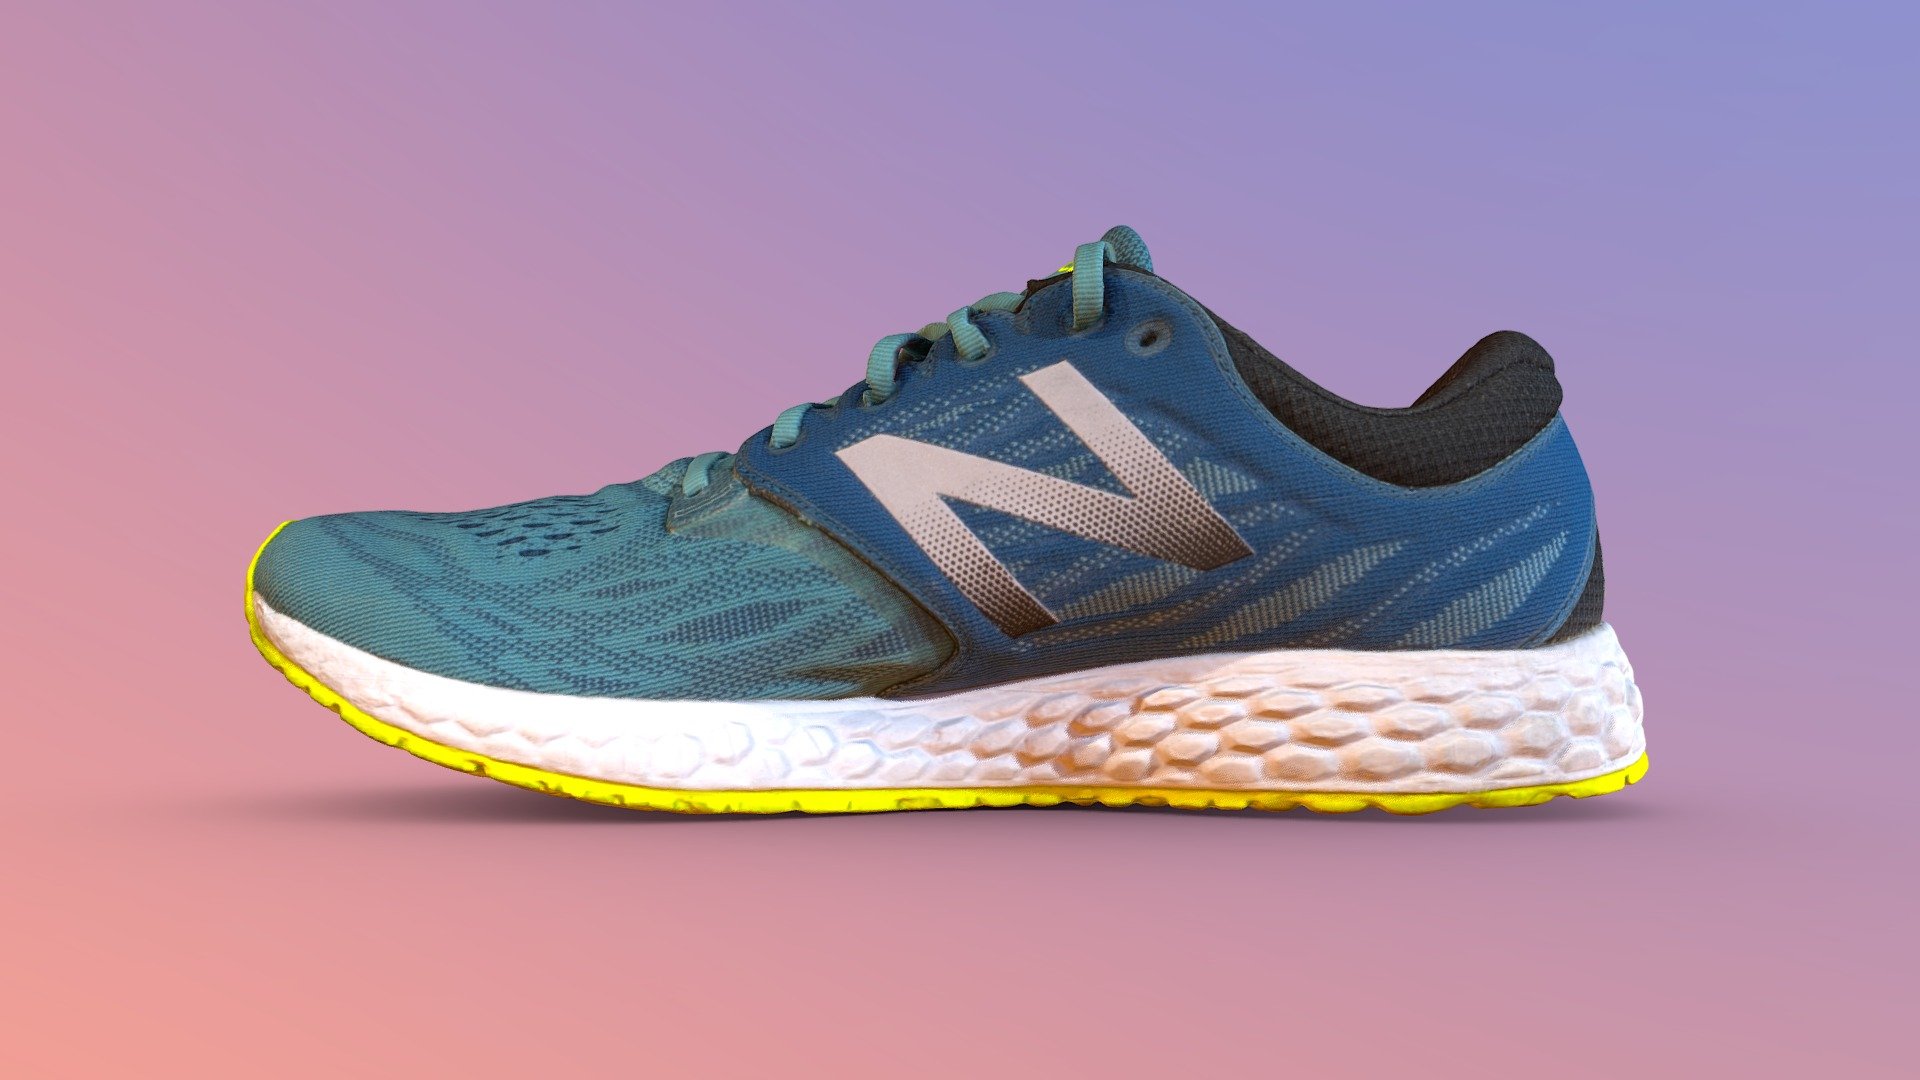 single camera 3D scan of a New Balance running sneaker

Retopologized to efficient quads, UVs and re-projected texture

All textures are 8192x8192 pixels - New Balance Fresh Foam Zante v3 - Buy Royalty Free 3D model by omegadarling 3d model